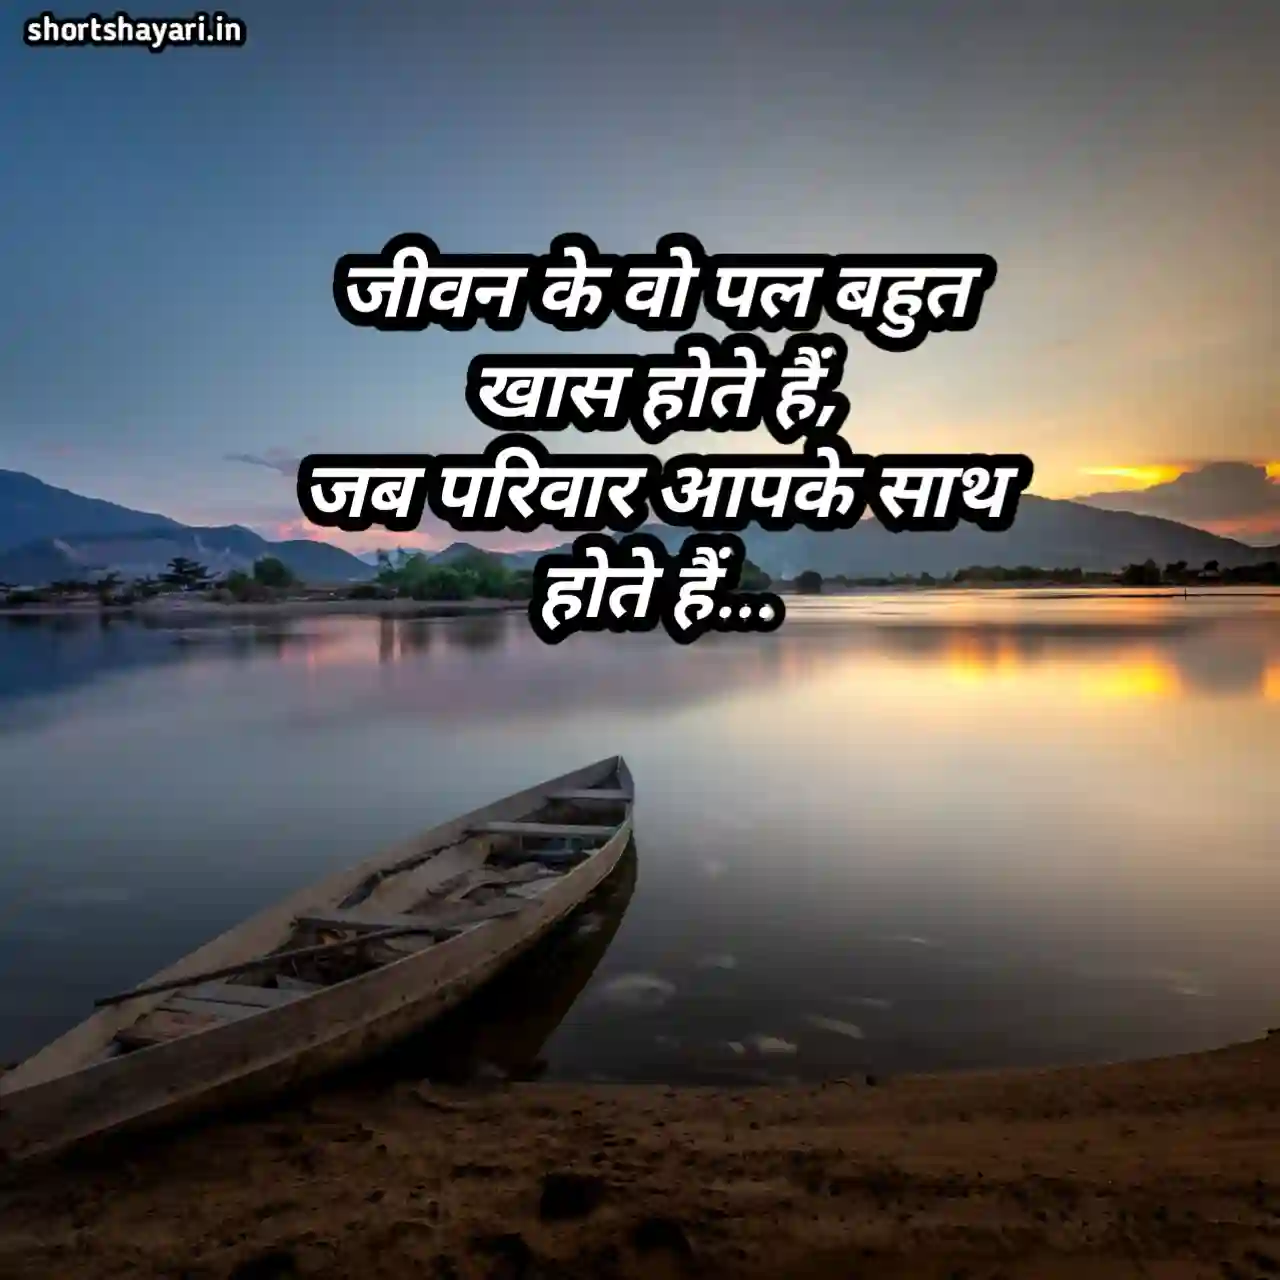 An Incredible Assortment of 999+ Hindi Quotes on Life with Pictures in Full 4K Resolution